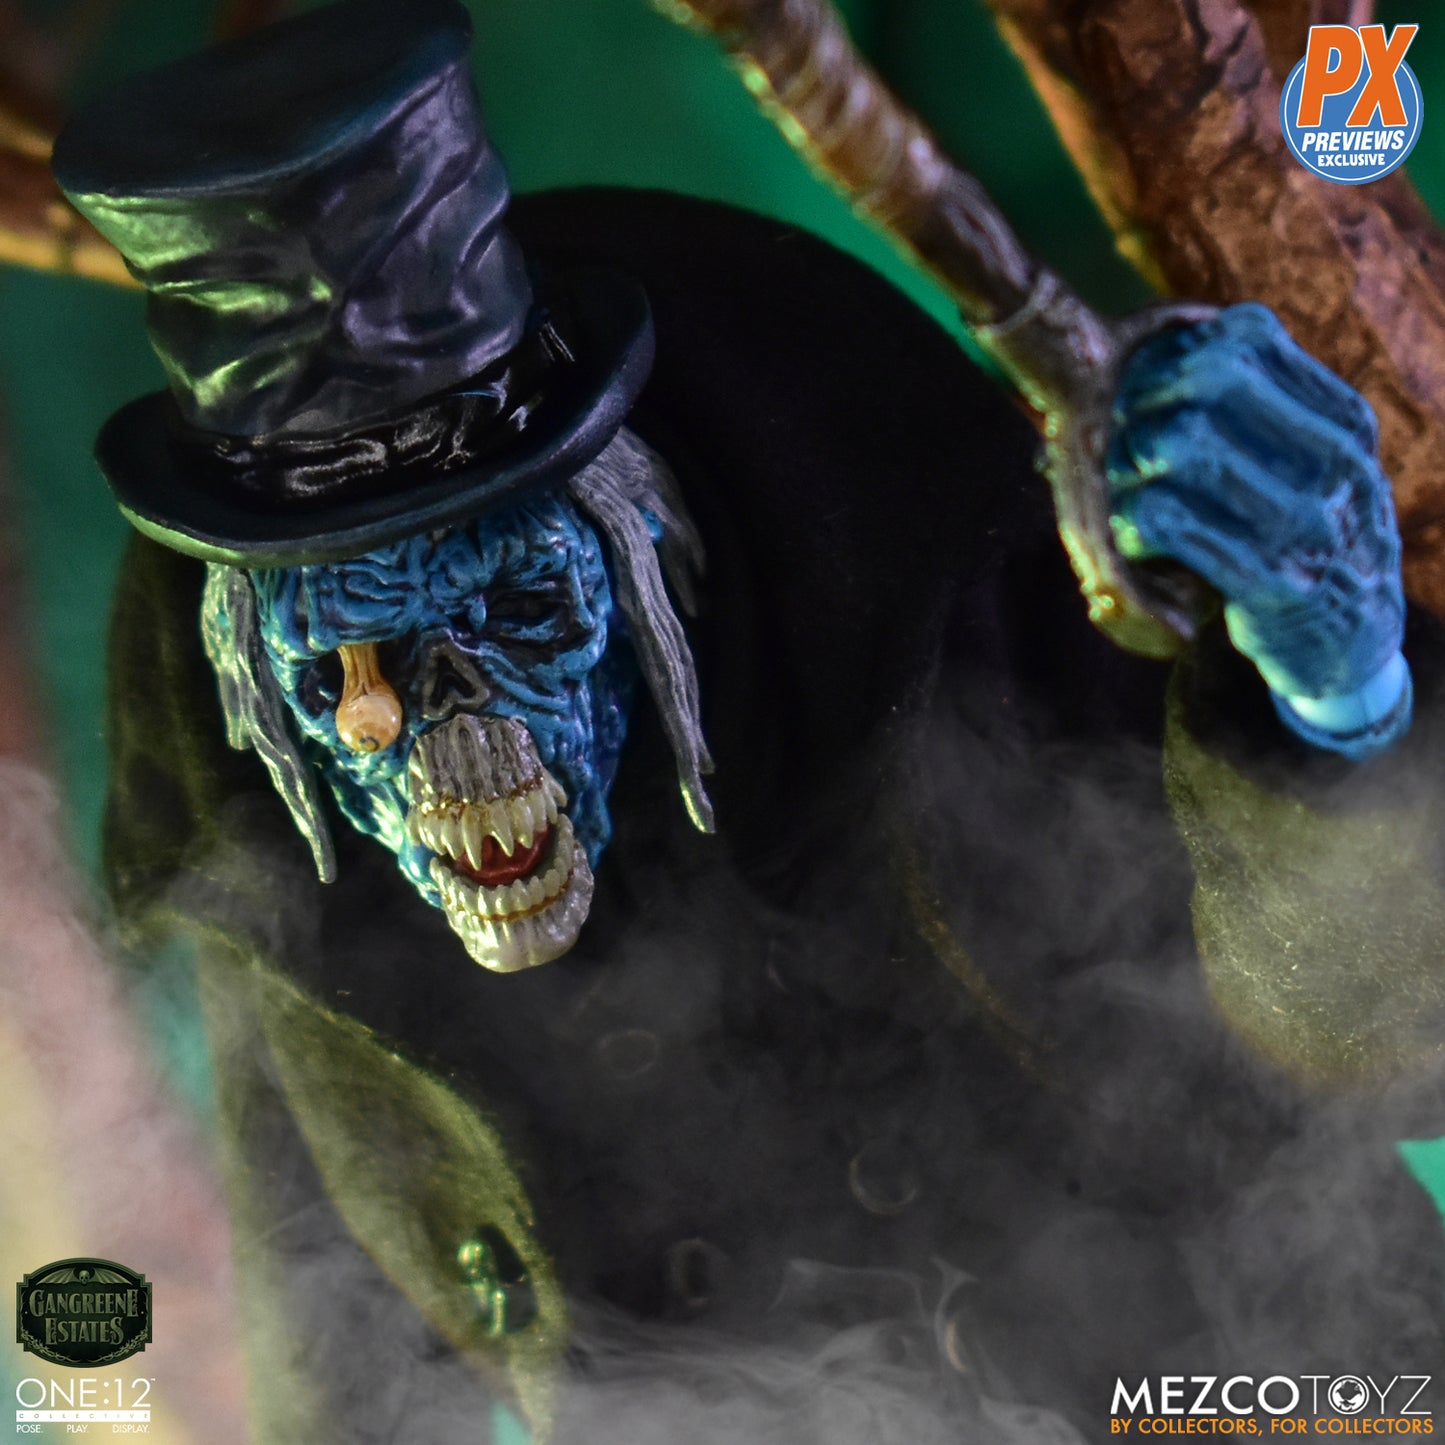 One-12 Collective Theodore Sodcutter Ghostly Ghoul Edition Previews Exclusive Action Figure